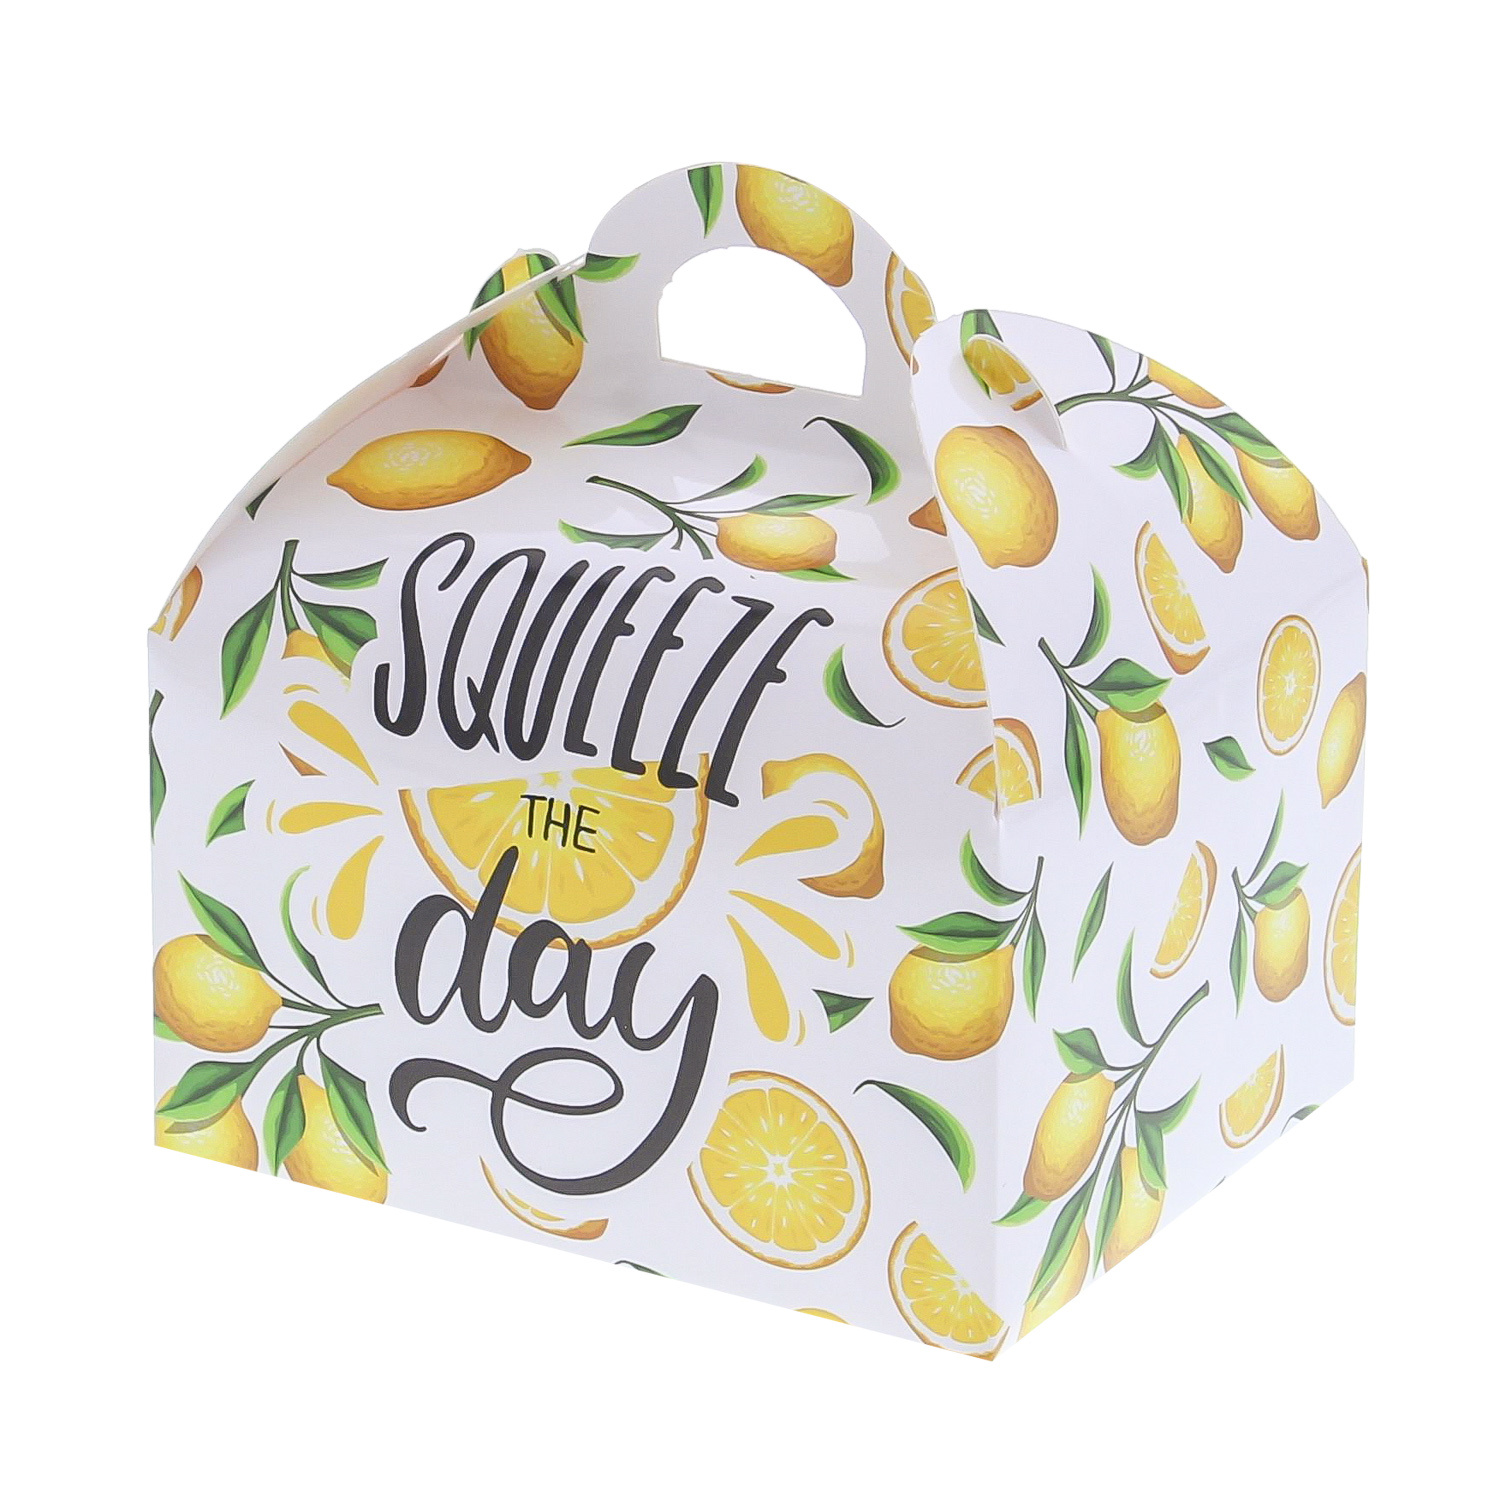 Sweetbox mit Griff 250 gr. "Lemons" squeeze the day - 100*80*110 mm - 50 Stück